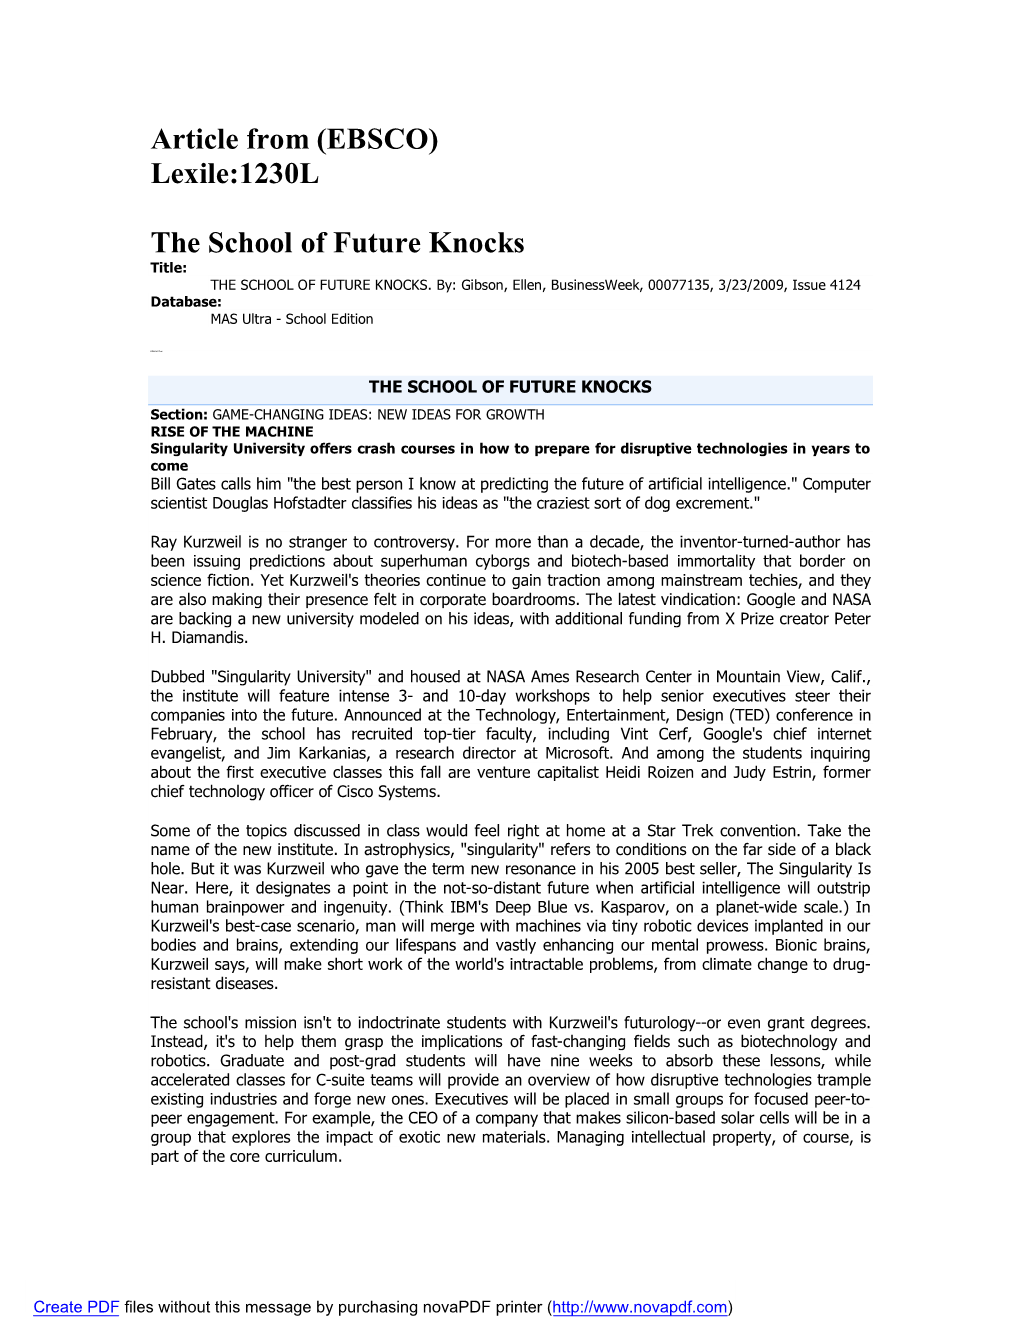 Article from (EBSCO) Lexile:1230L the School of Future Knocks